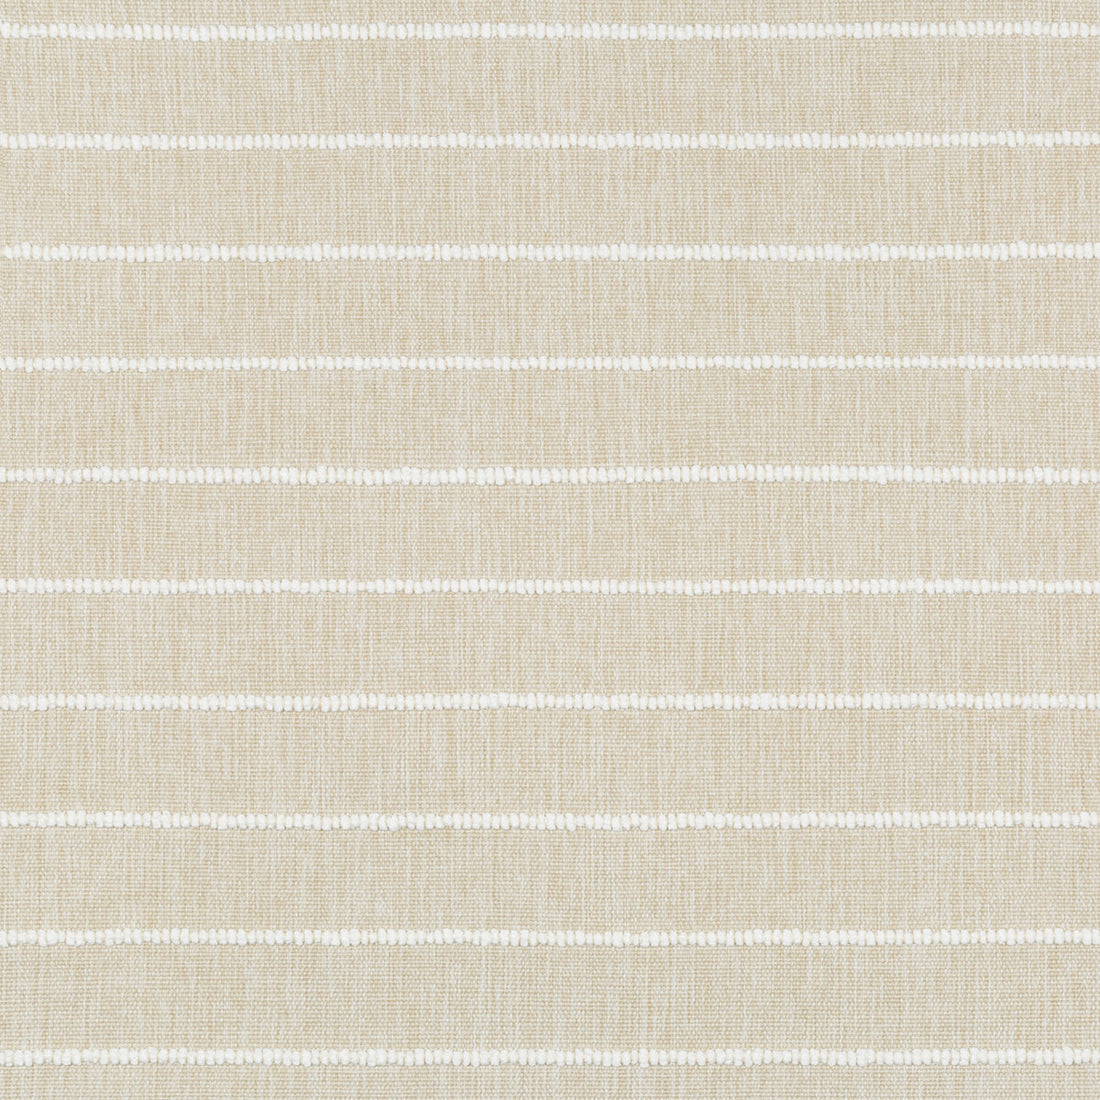 Off The Coast fabric in white sand color - pattern 35536.16.0 - by Kravet Couture in the Vista collection